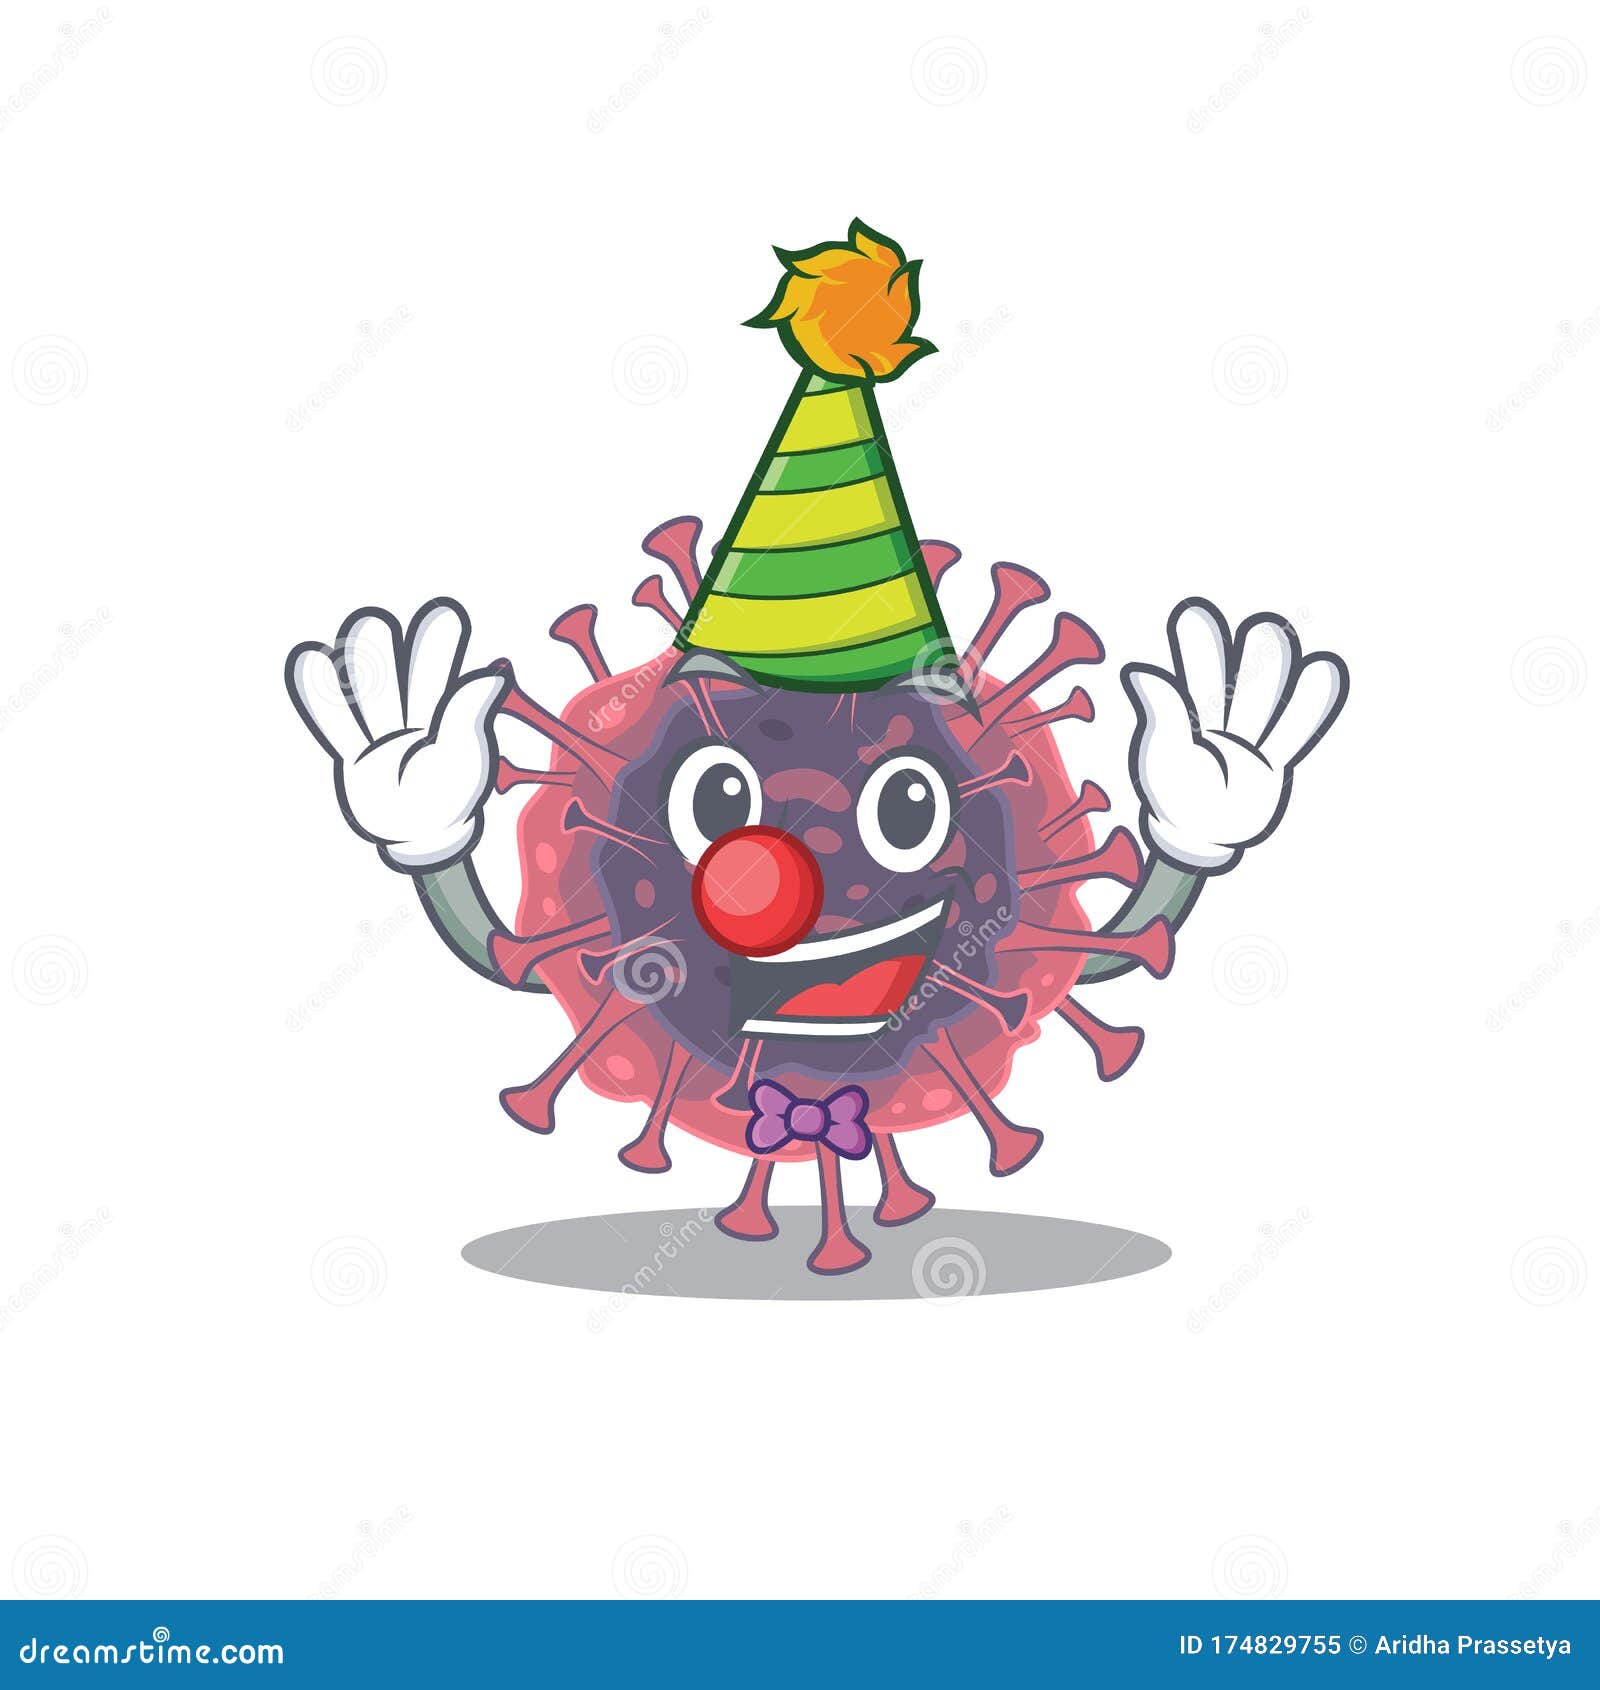 Cute And Funny Clown Microbiology Coronavirus Cartoon Character Mascot Style Stock Vector Illustration Of Bacteria Cell 174829755